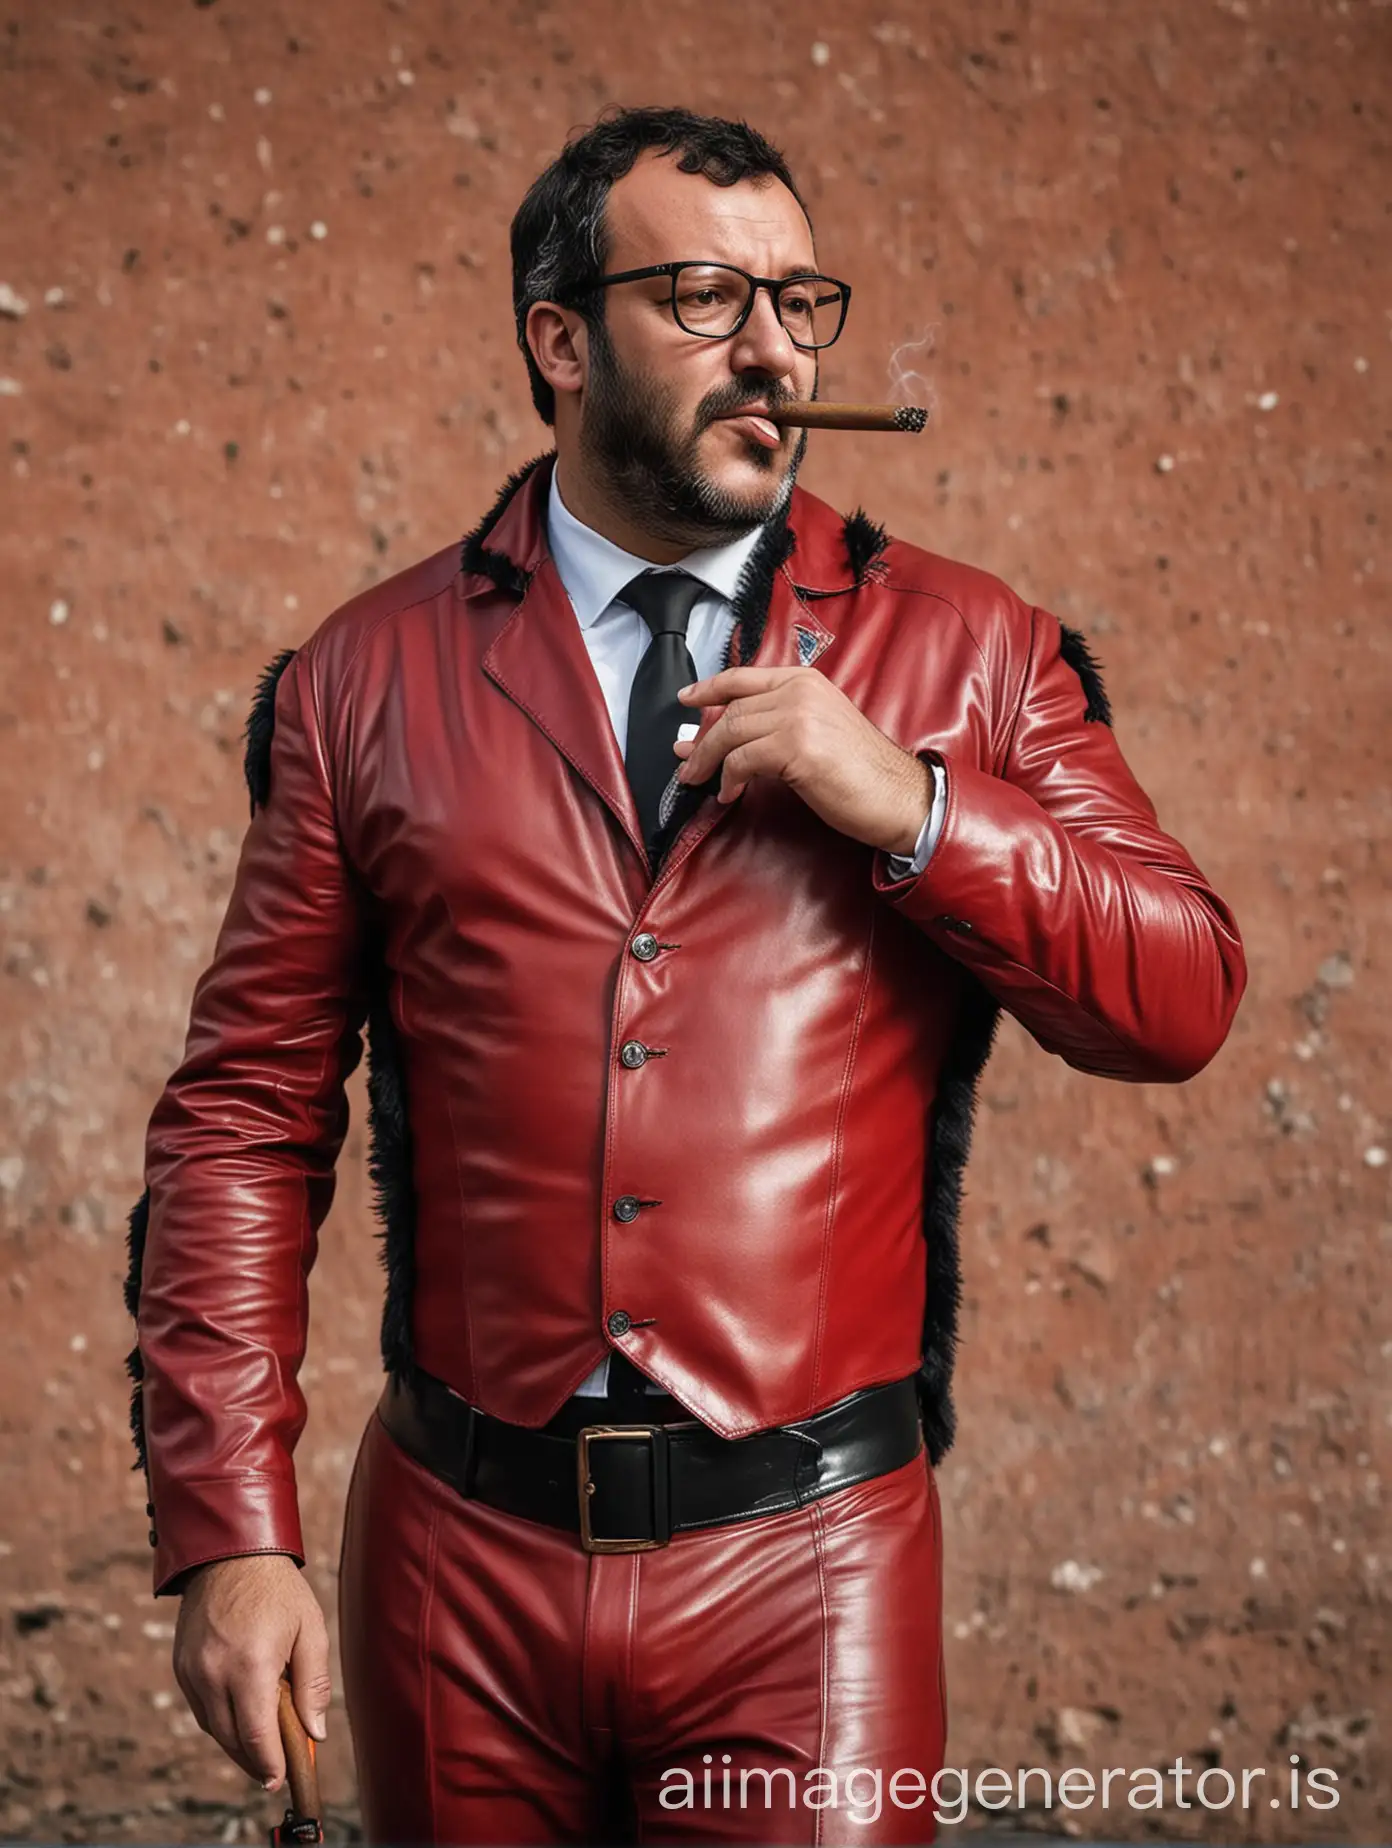 Matteo-Salvini-Italian-Minister-in-Red-and-Black-Leather-Suit-Smoking-Cigar